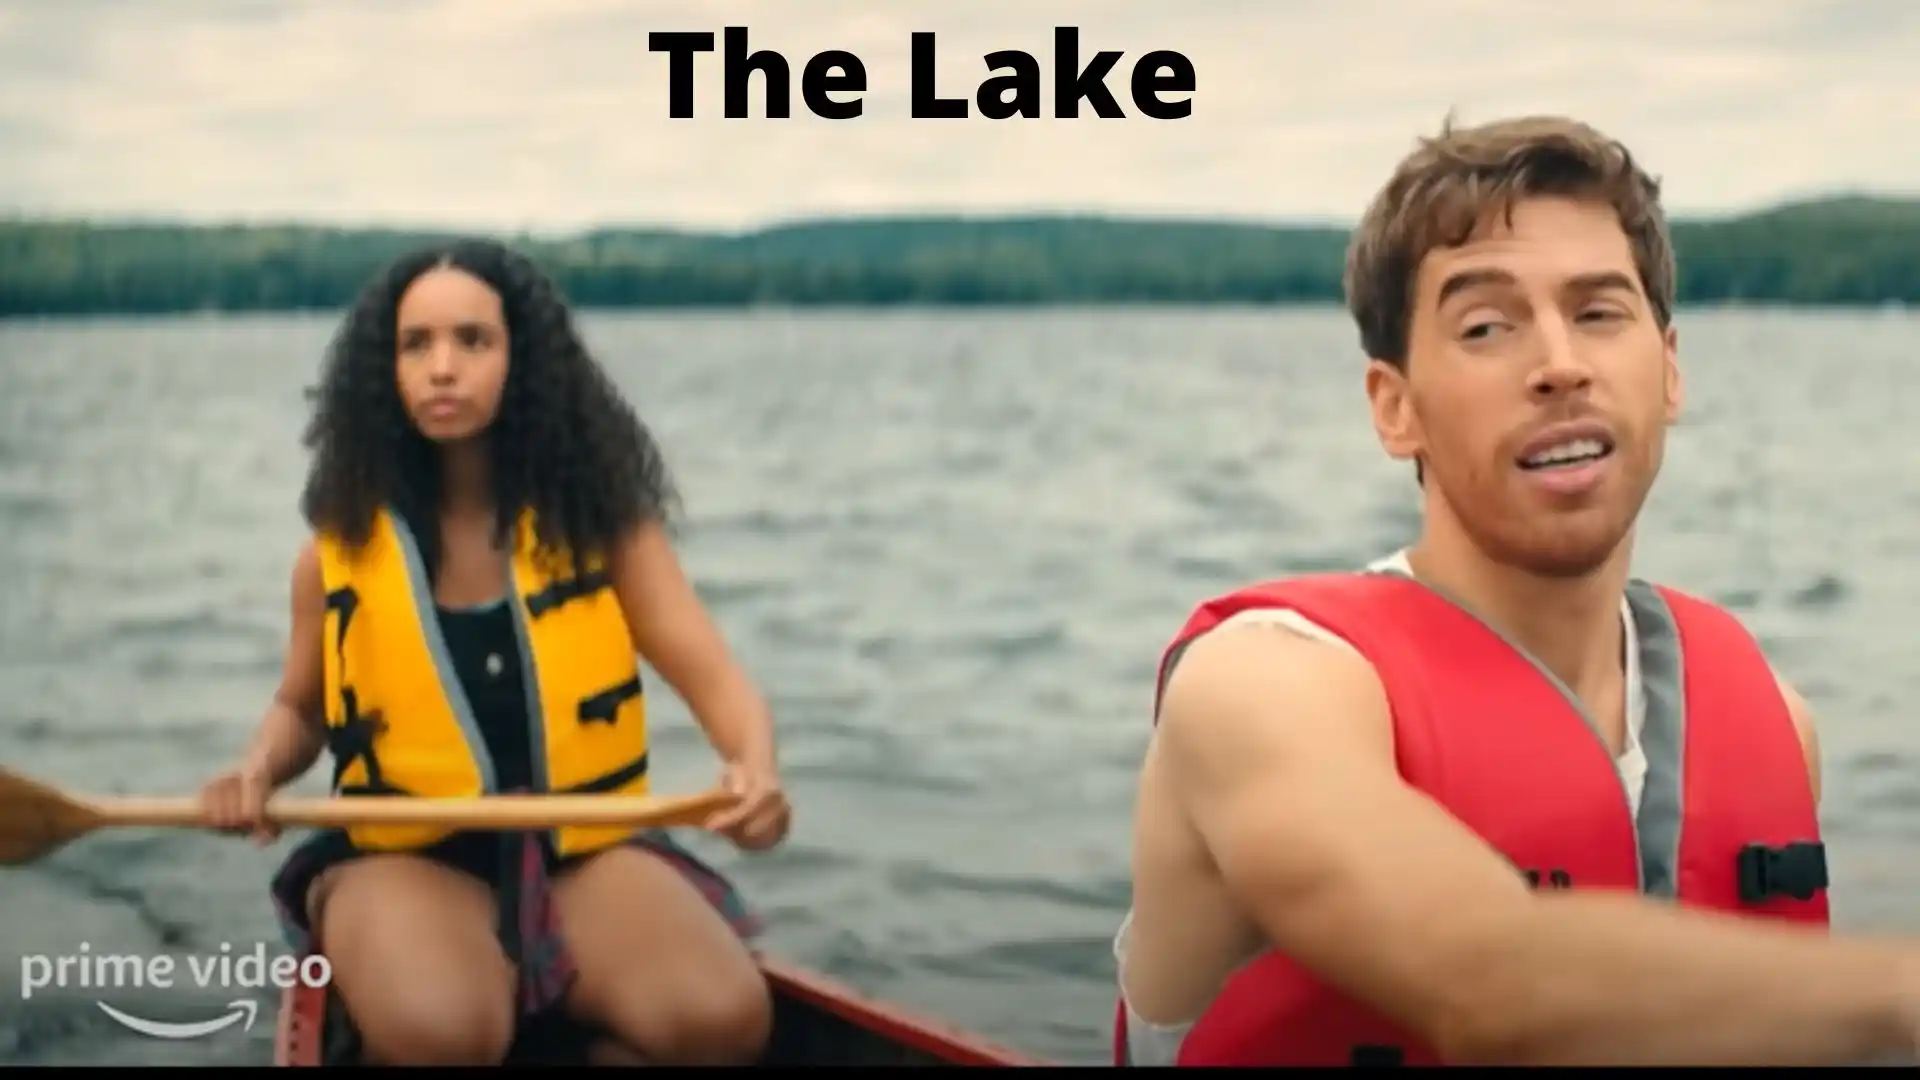 The Lake Parents Guide and The Lake Age Rating | 2022